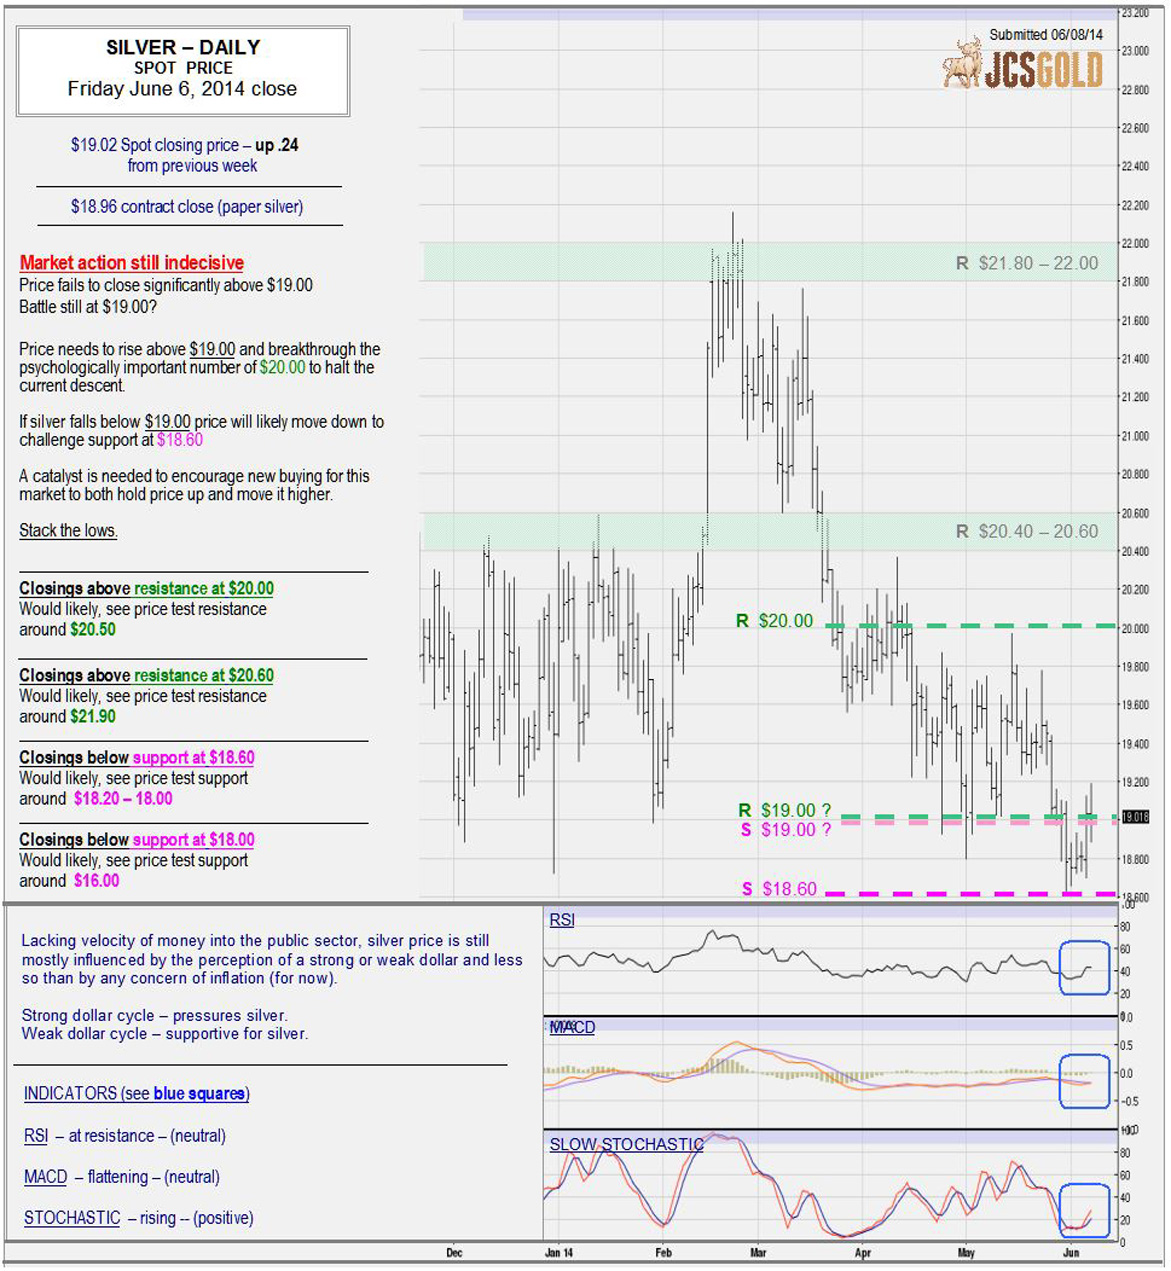 June 6, 2014 chart & commentary